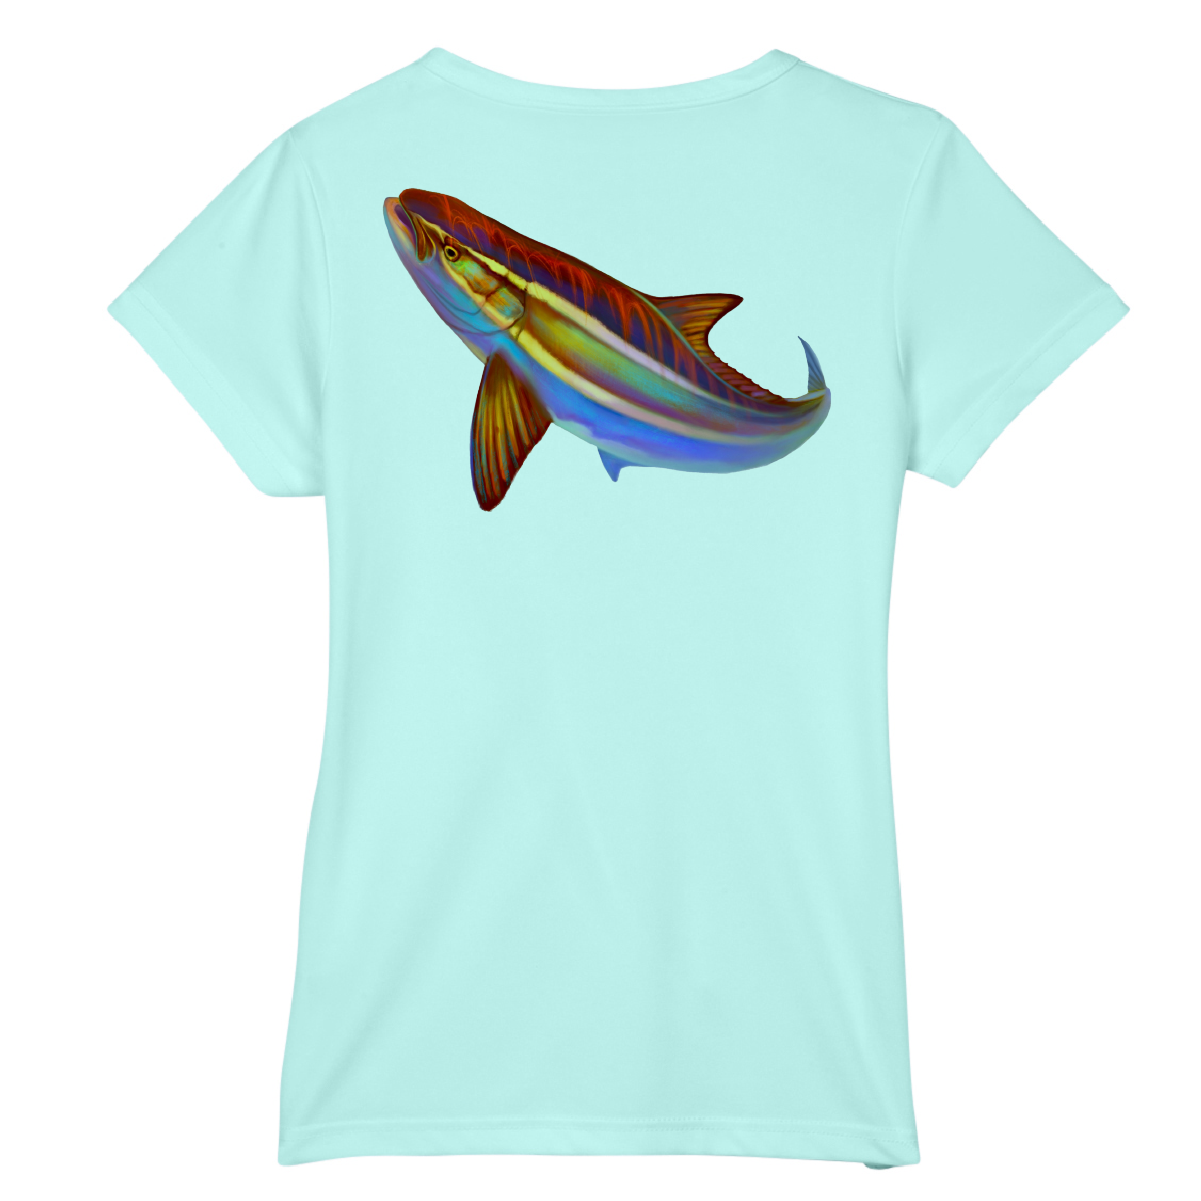 Cobia Short-Sleeve Dry-Fit T-Shirt